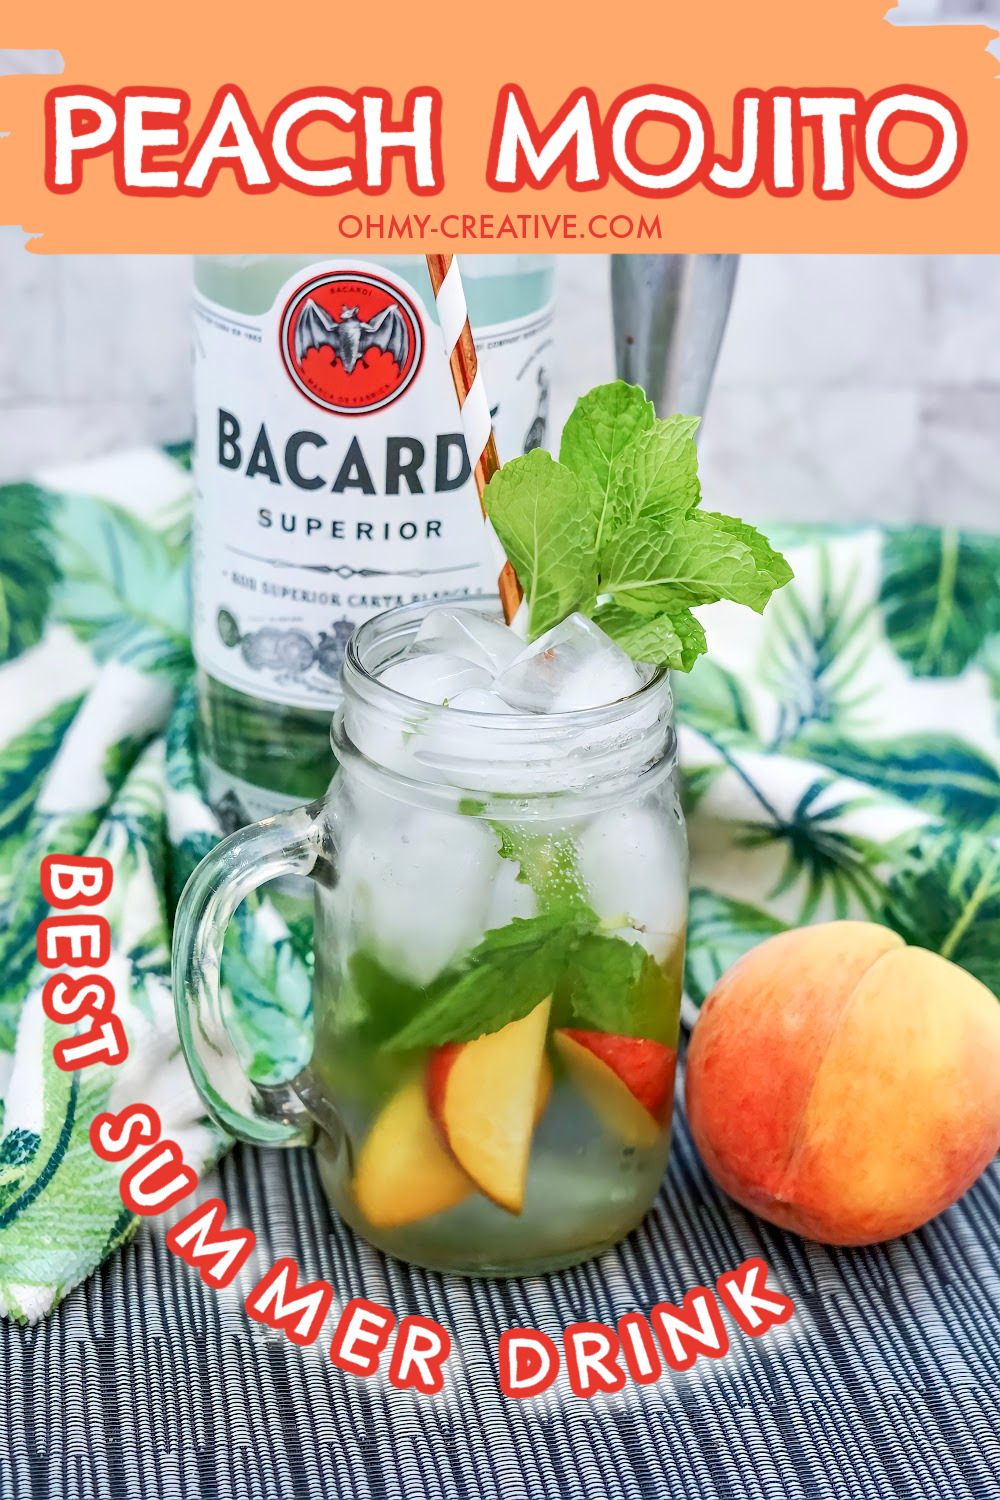 peach mojito cocktail surrounded by fresh peaches served in a mason jar and a bottle of bacardi rum in the background.